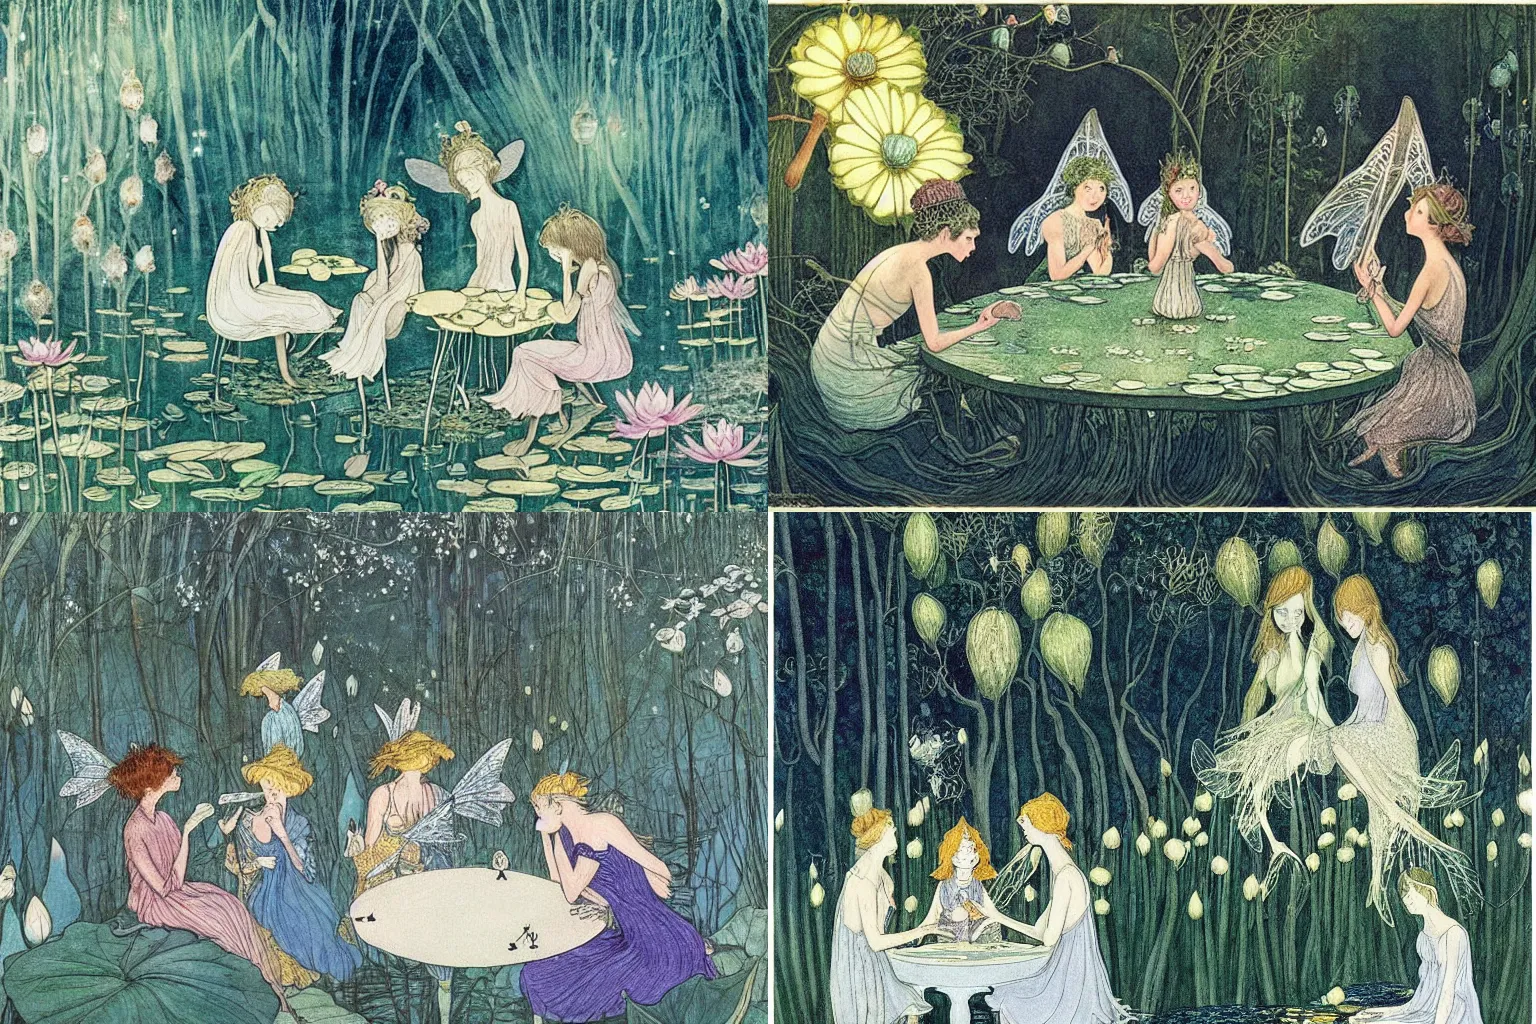 Prompt: a group of gracious winged fairies playing cards on a table in an atmospheric moonlit forest next to a beautiful pond filled with water lilies, artwork by ida rentoul outhwaite